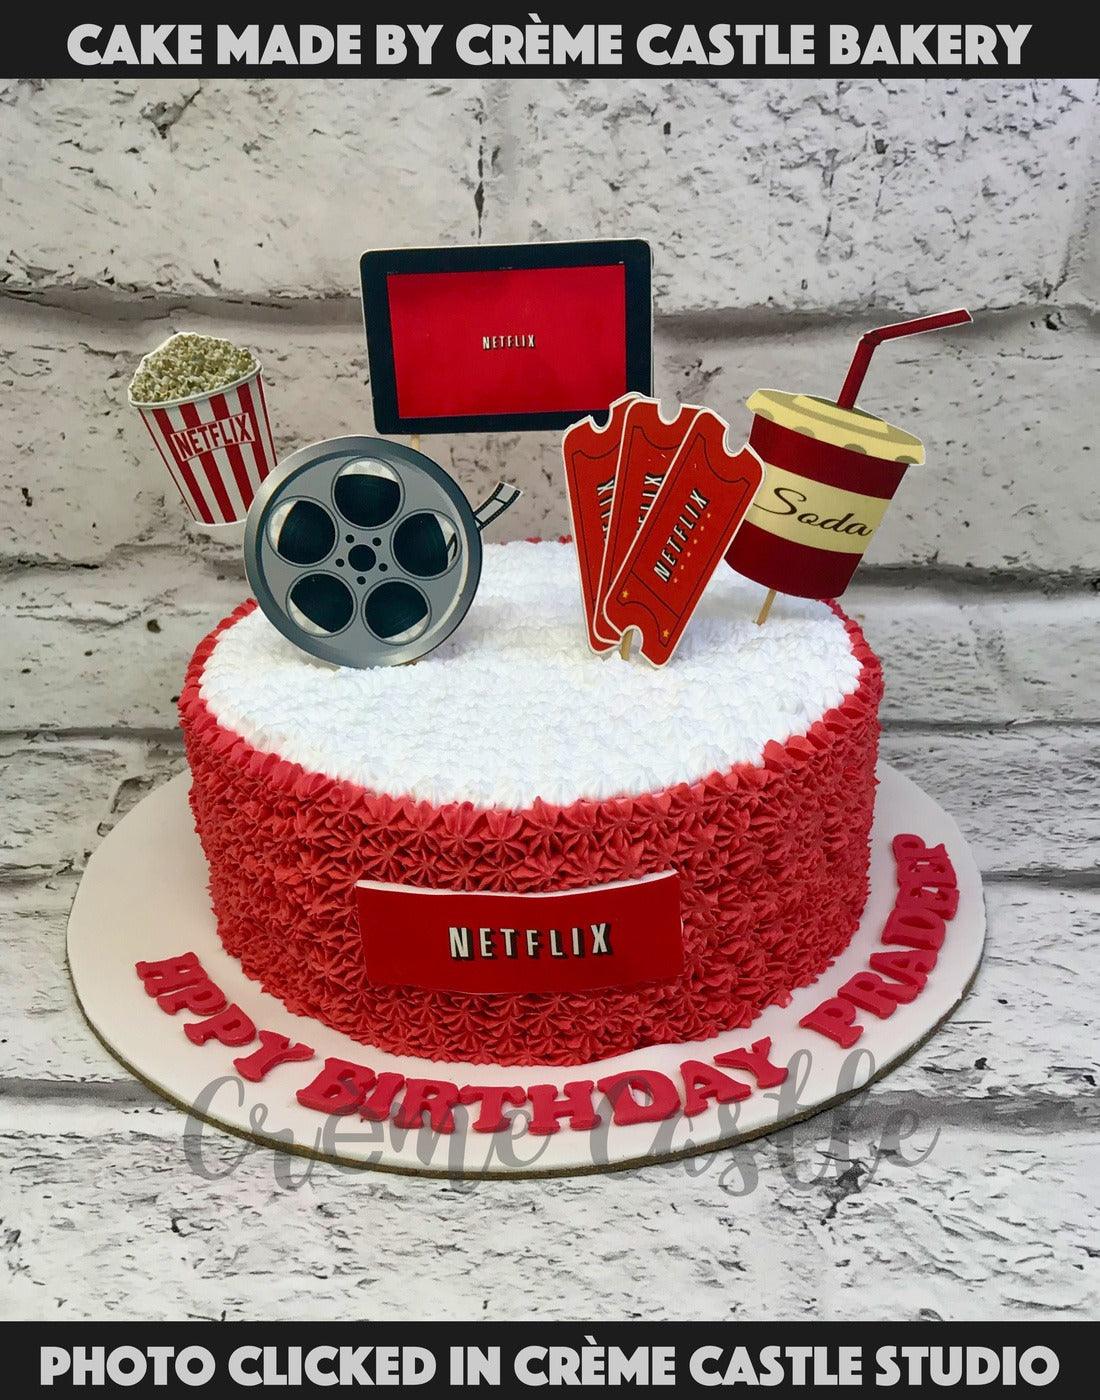 Football Or Netflix & Chill: Get A Cake Customised To Your Life From This  Kolkata Baker | LBB